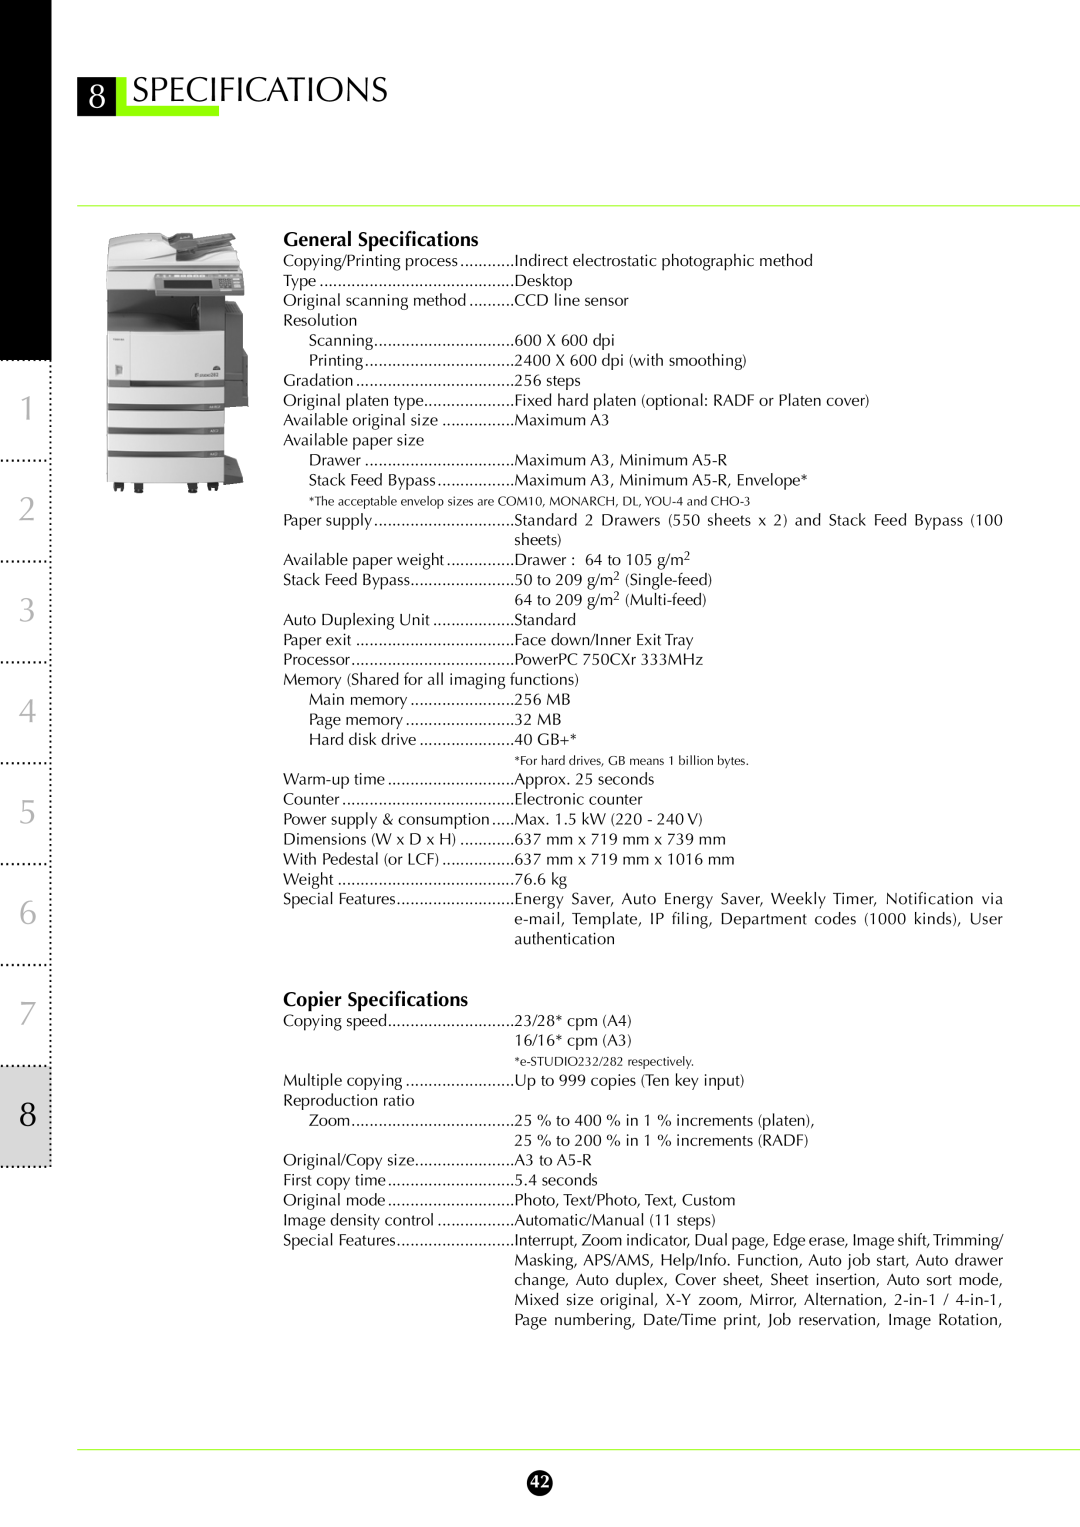 Toshiba 232, 282 manual General Specifications, Copier Specifications 